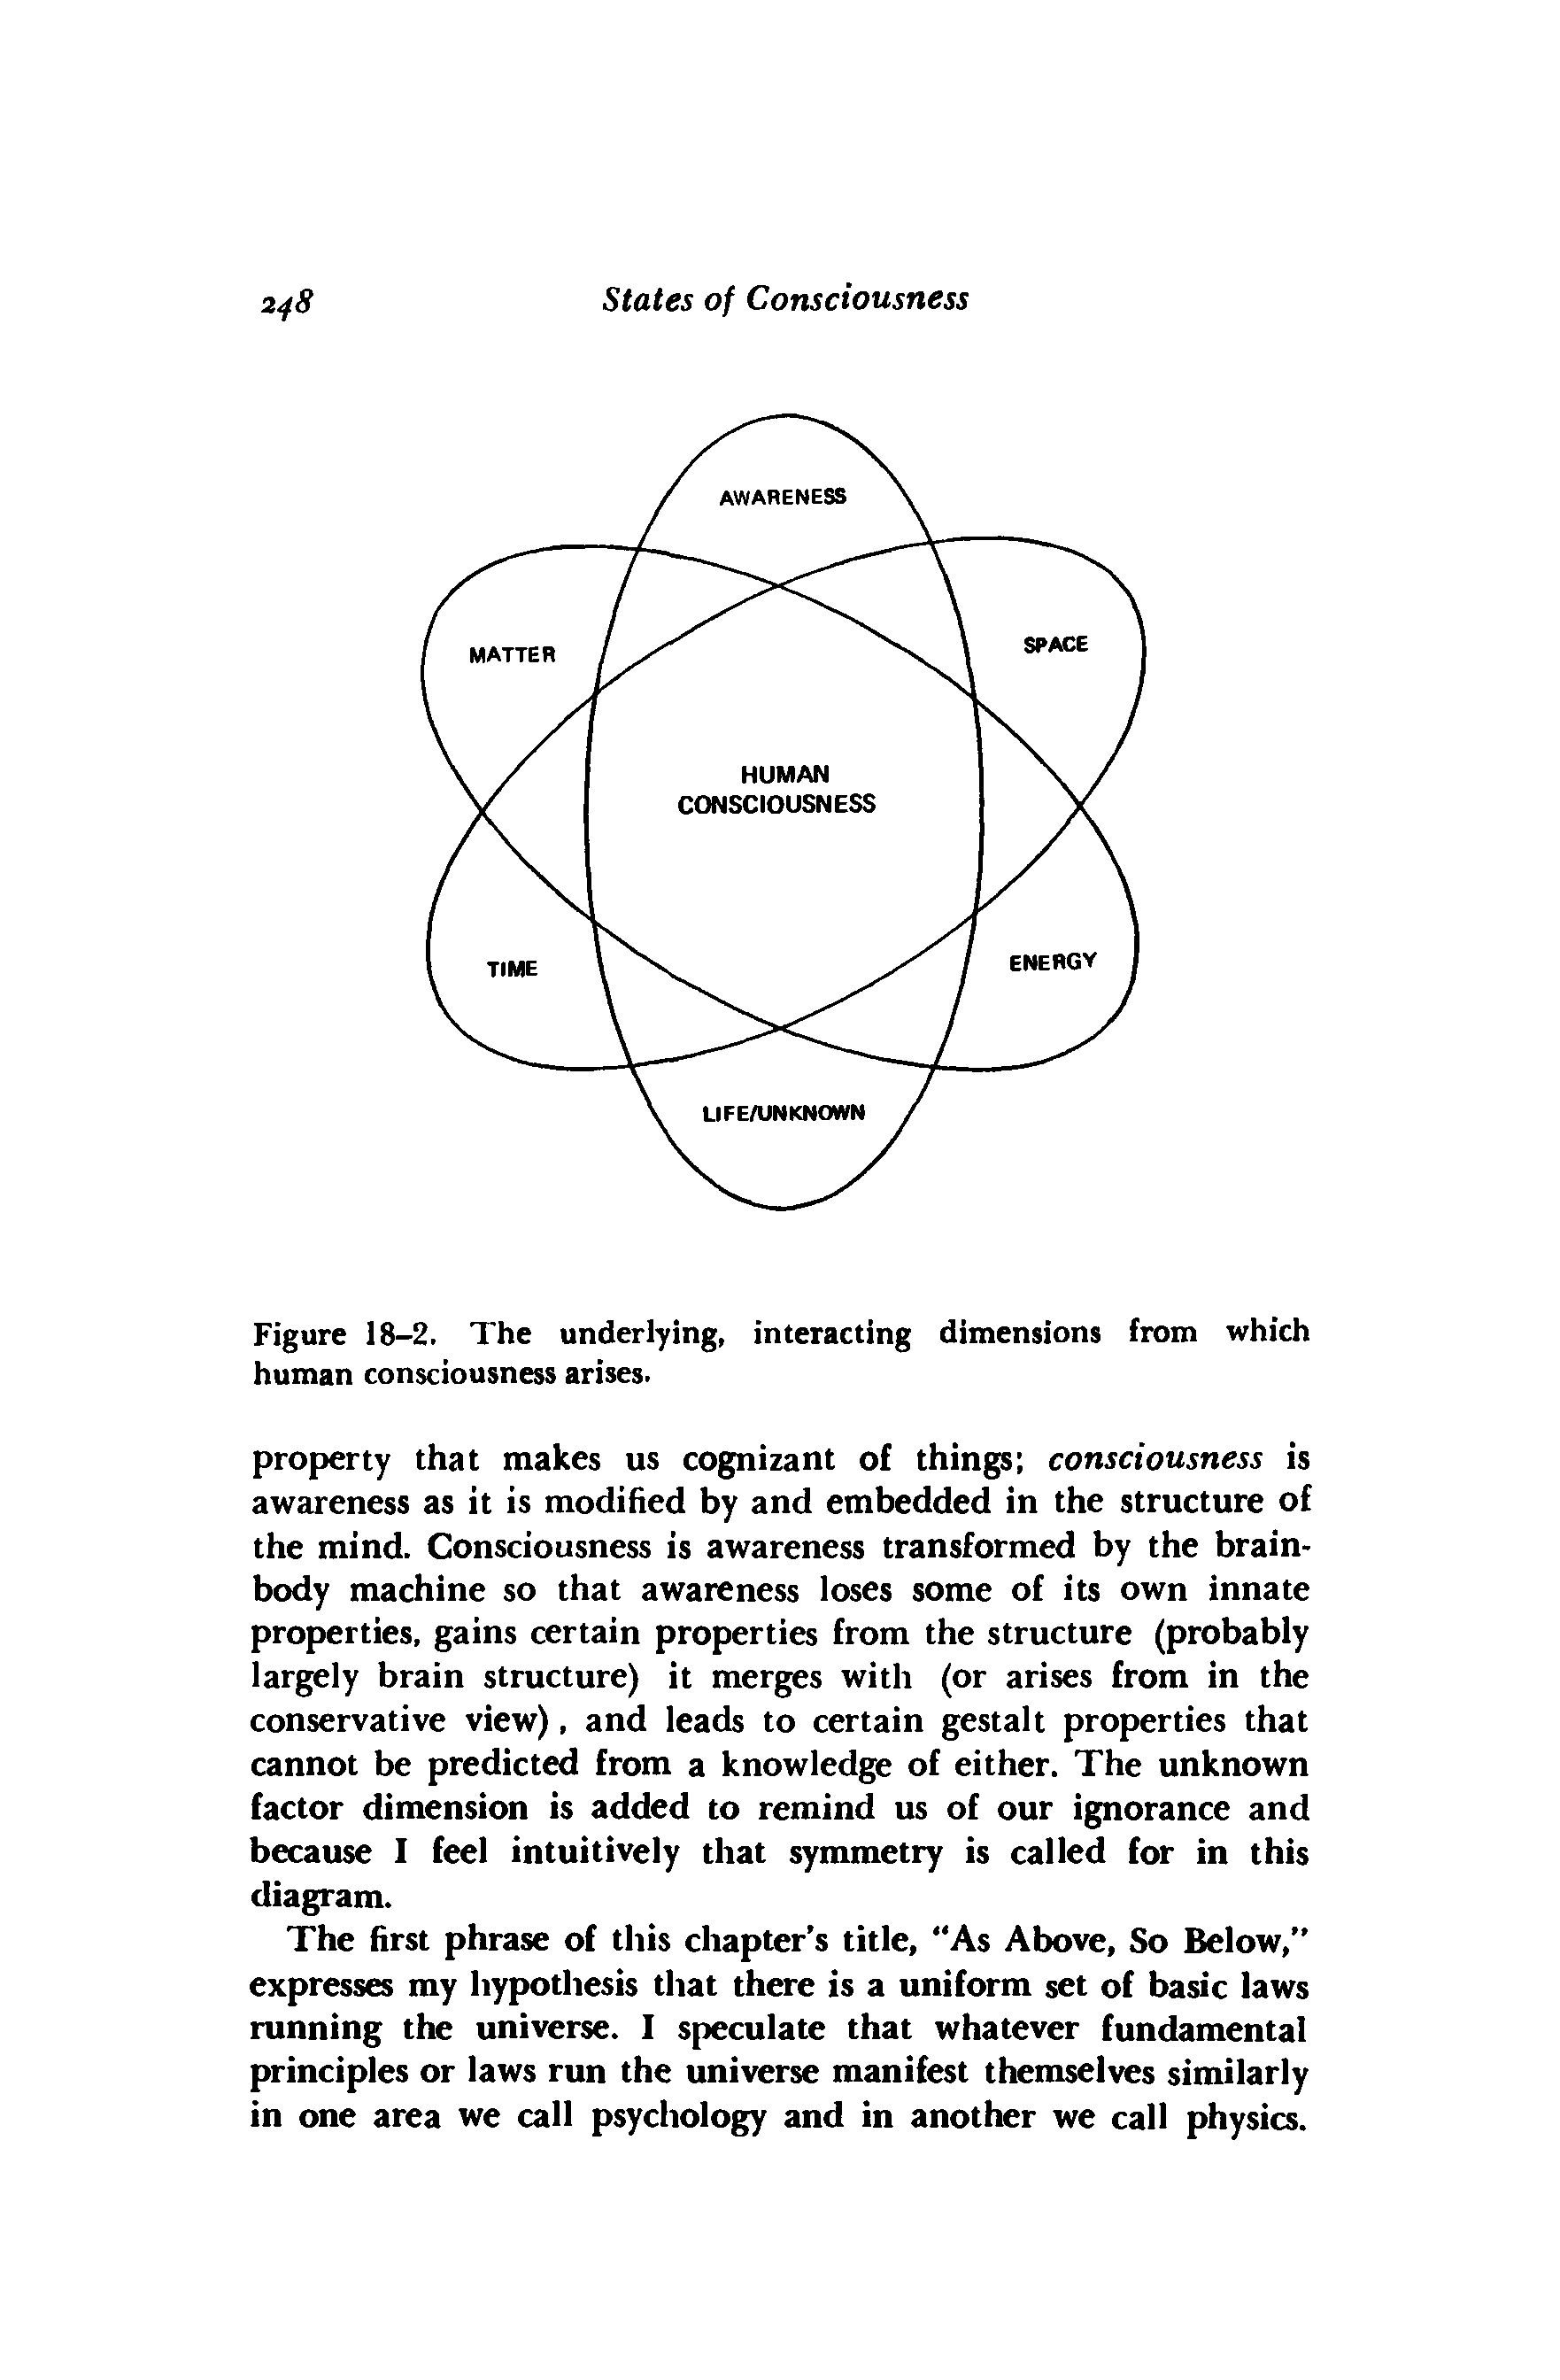 Figure 18-2. The underlying, interacting dimensions from which human consciousness arises.